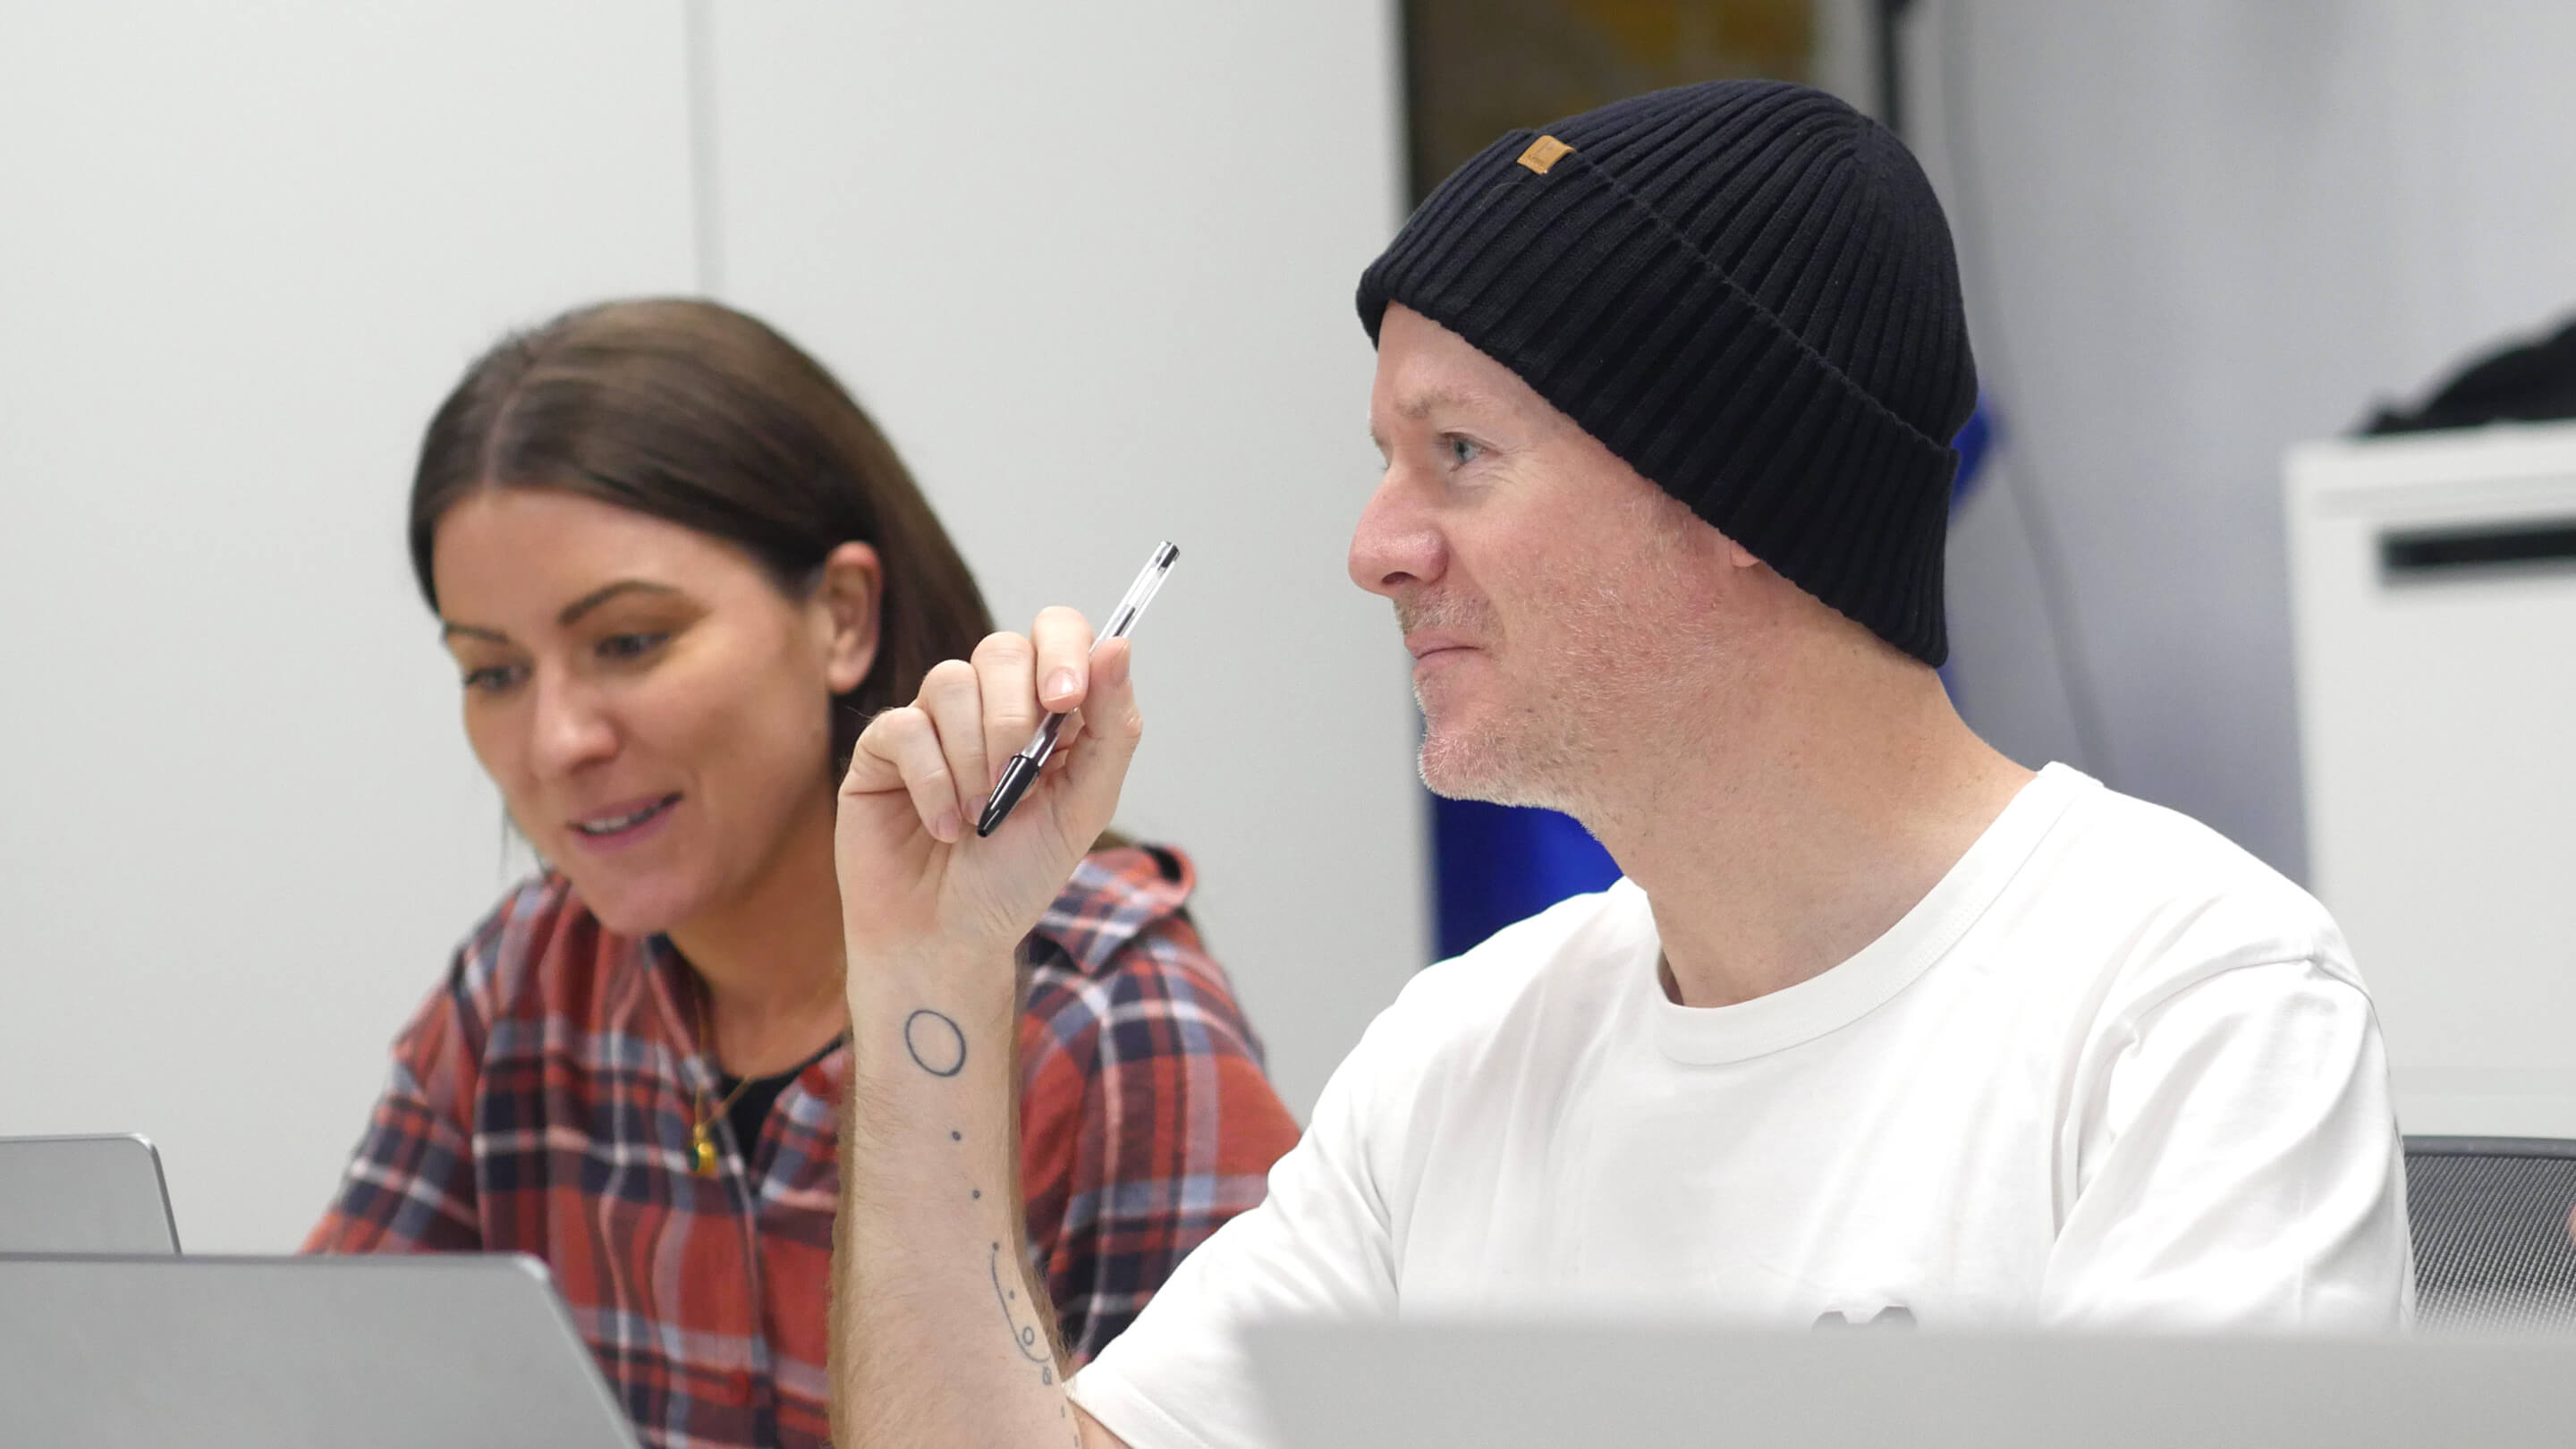 man with beanie holding pen and woman working in office meeting room